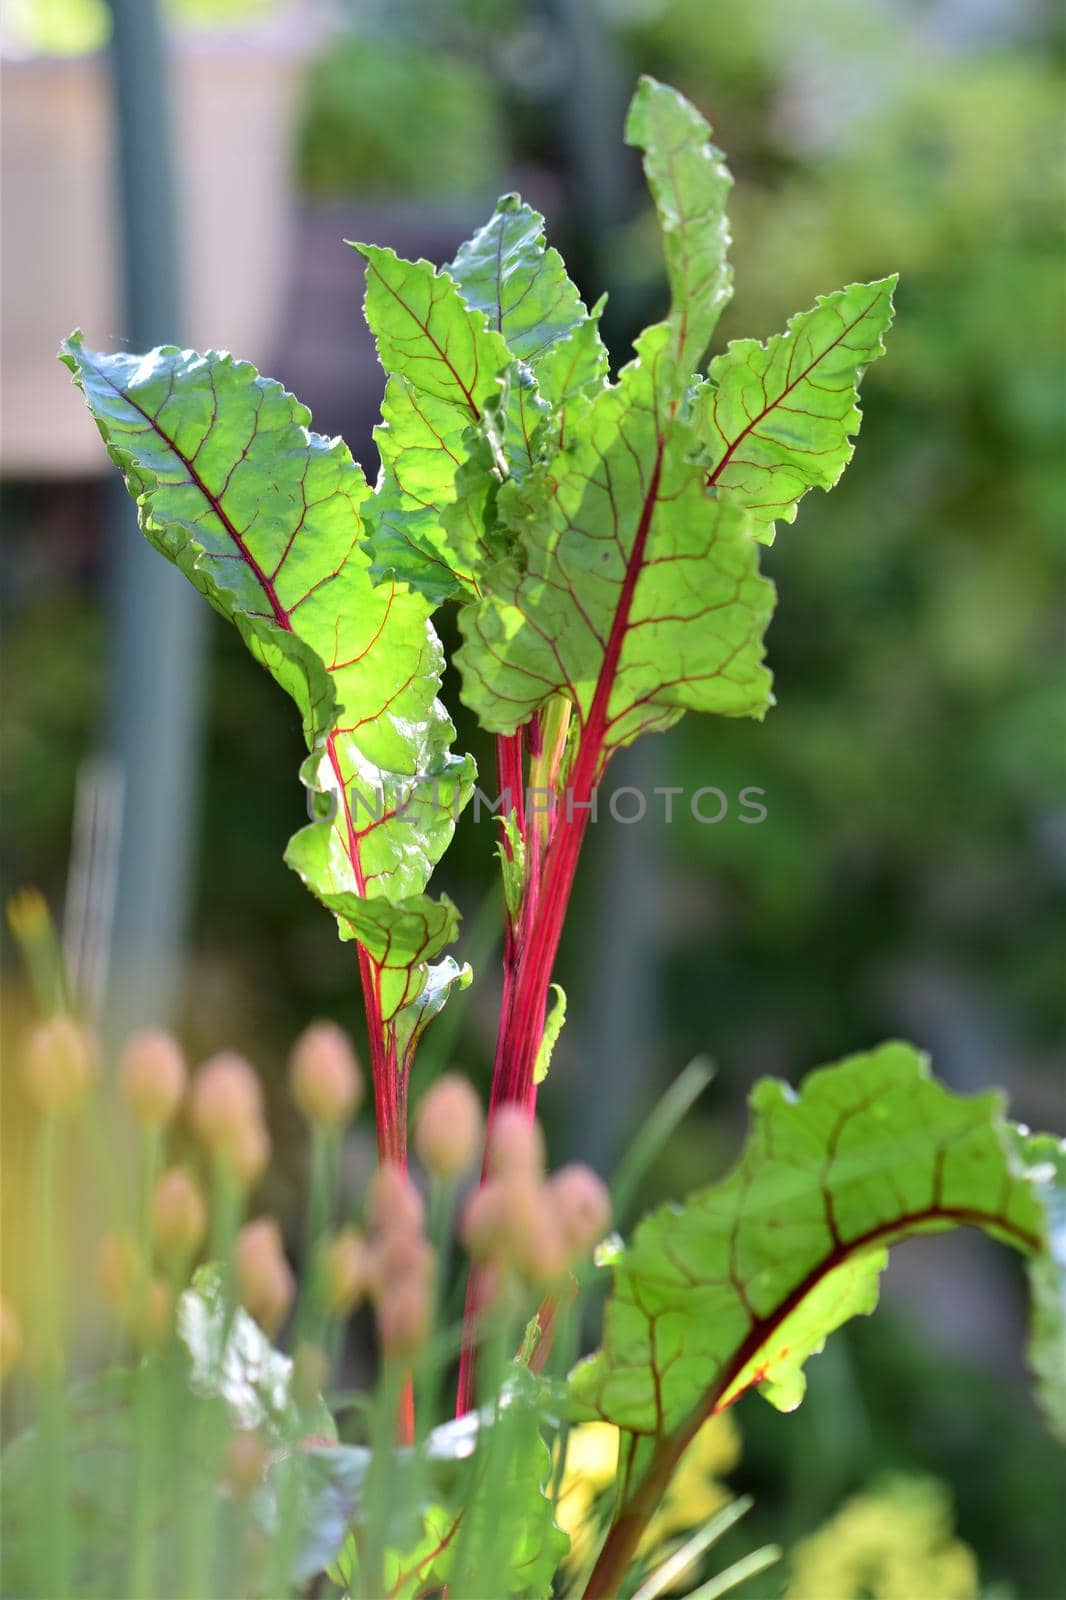 Red chard with chives in the foreground with different depth of field by Luise123